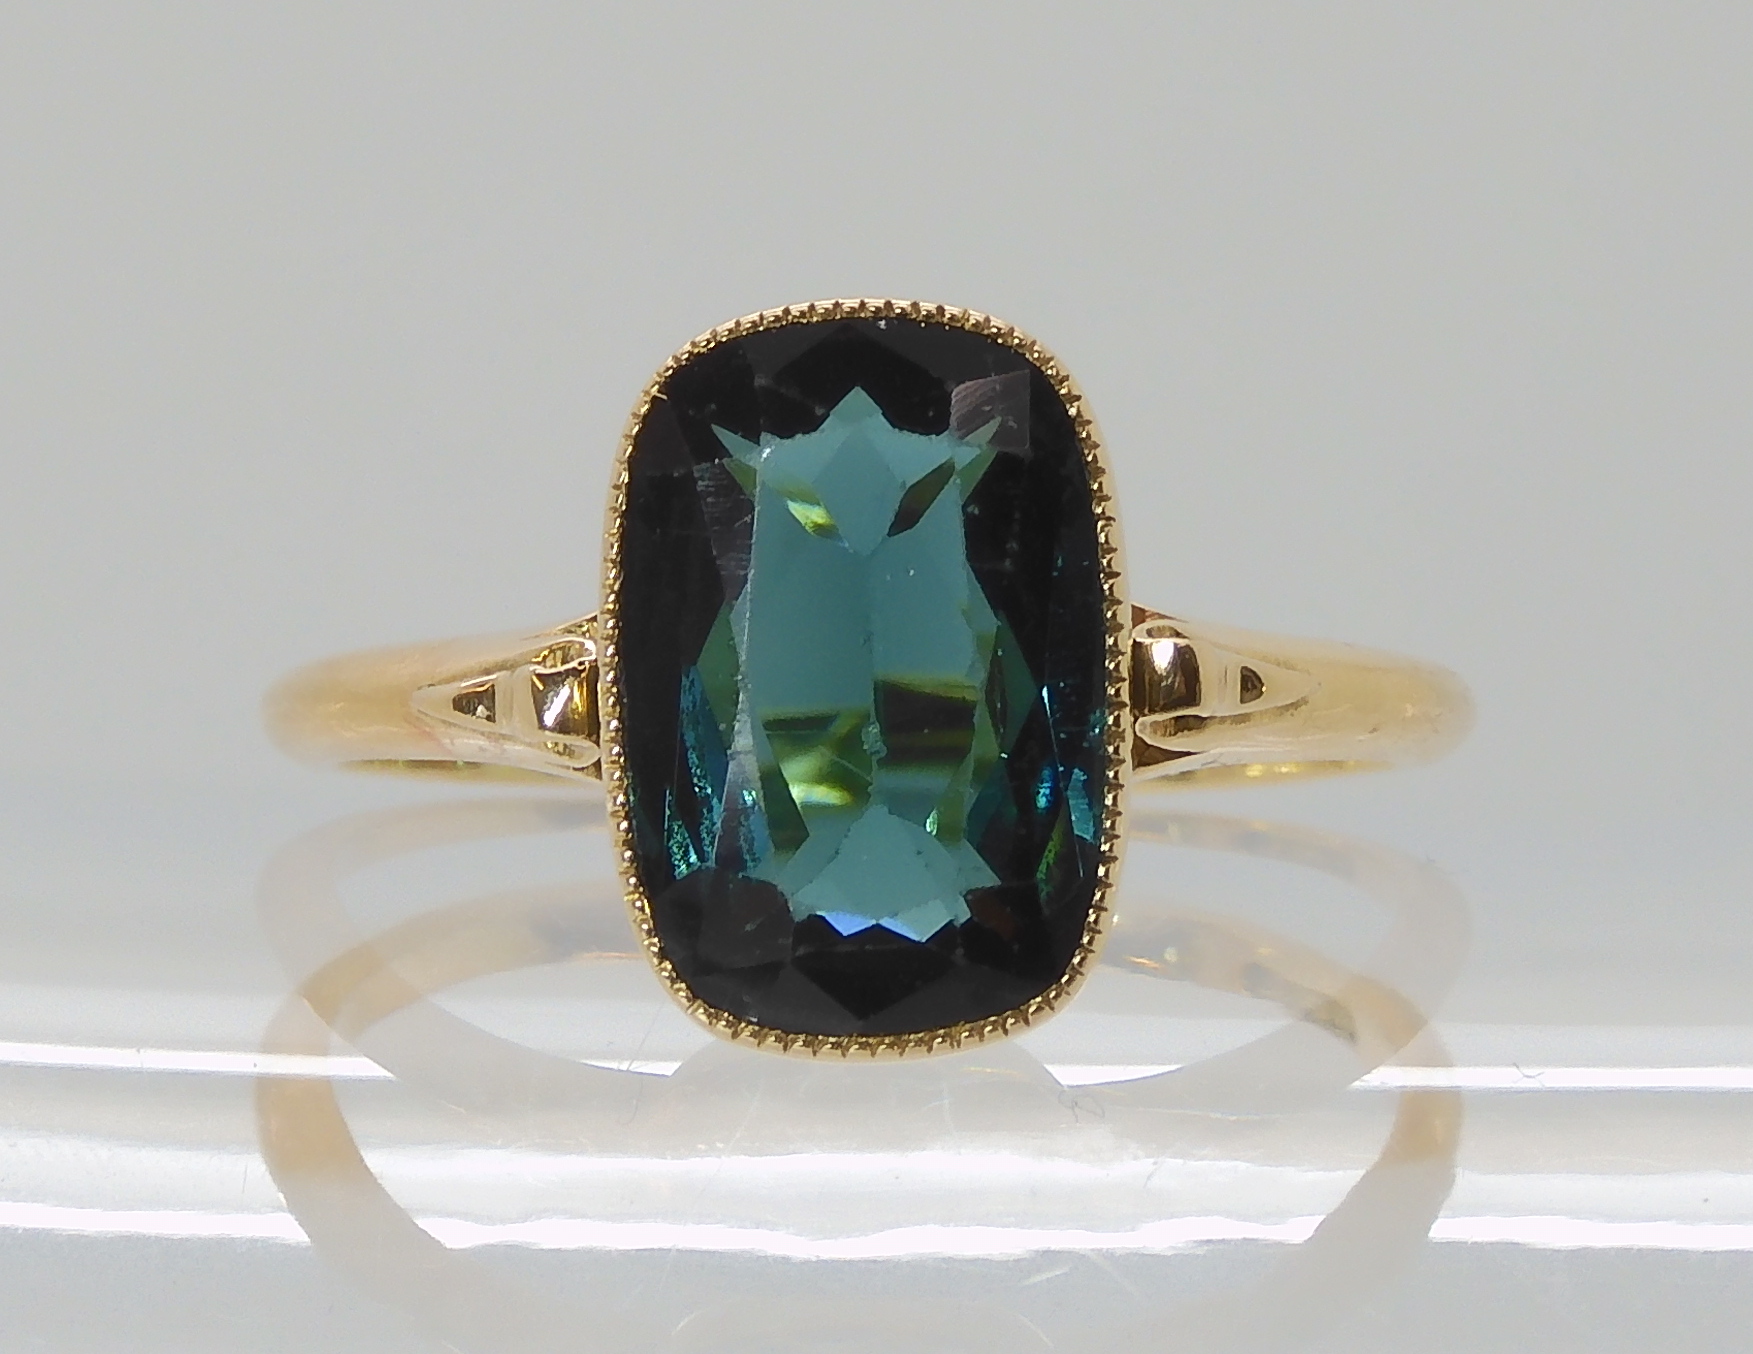 A TEAL COLOURED TOURMALINE RING mounted in bright yellow metal, with decorative scroll shoulders, - Image 2 of 4